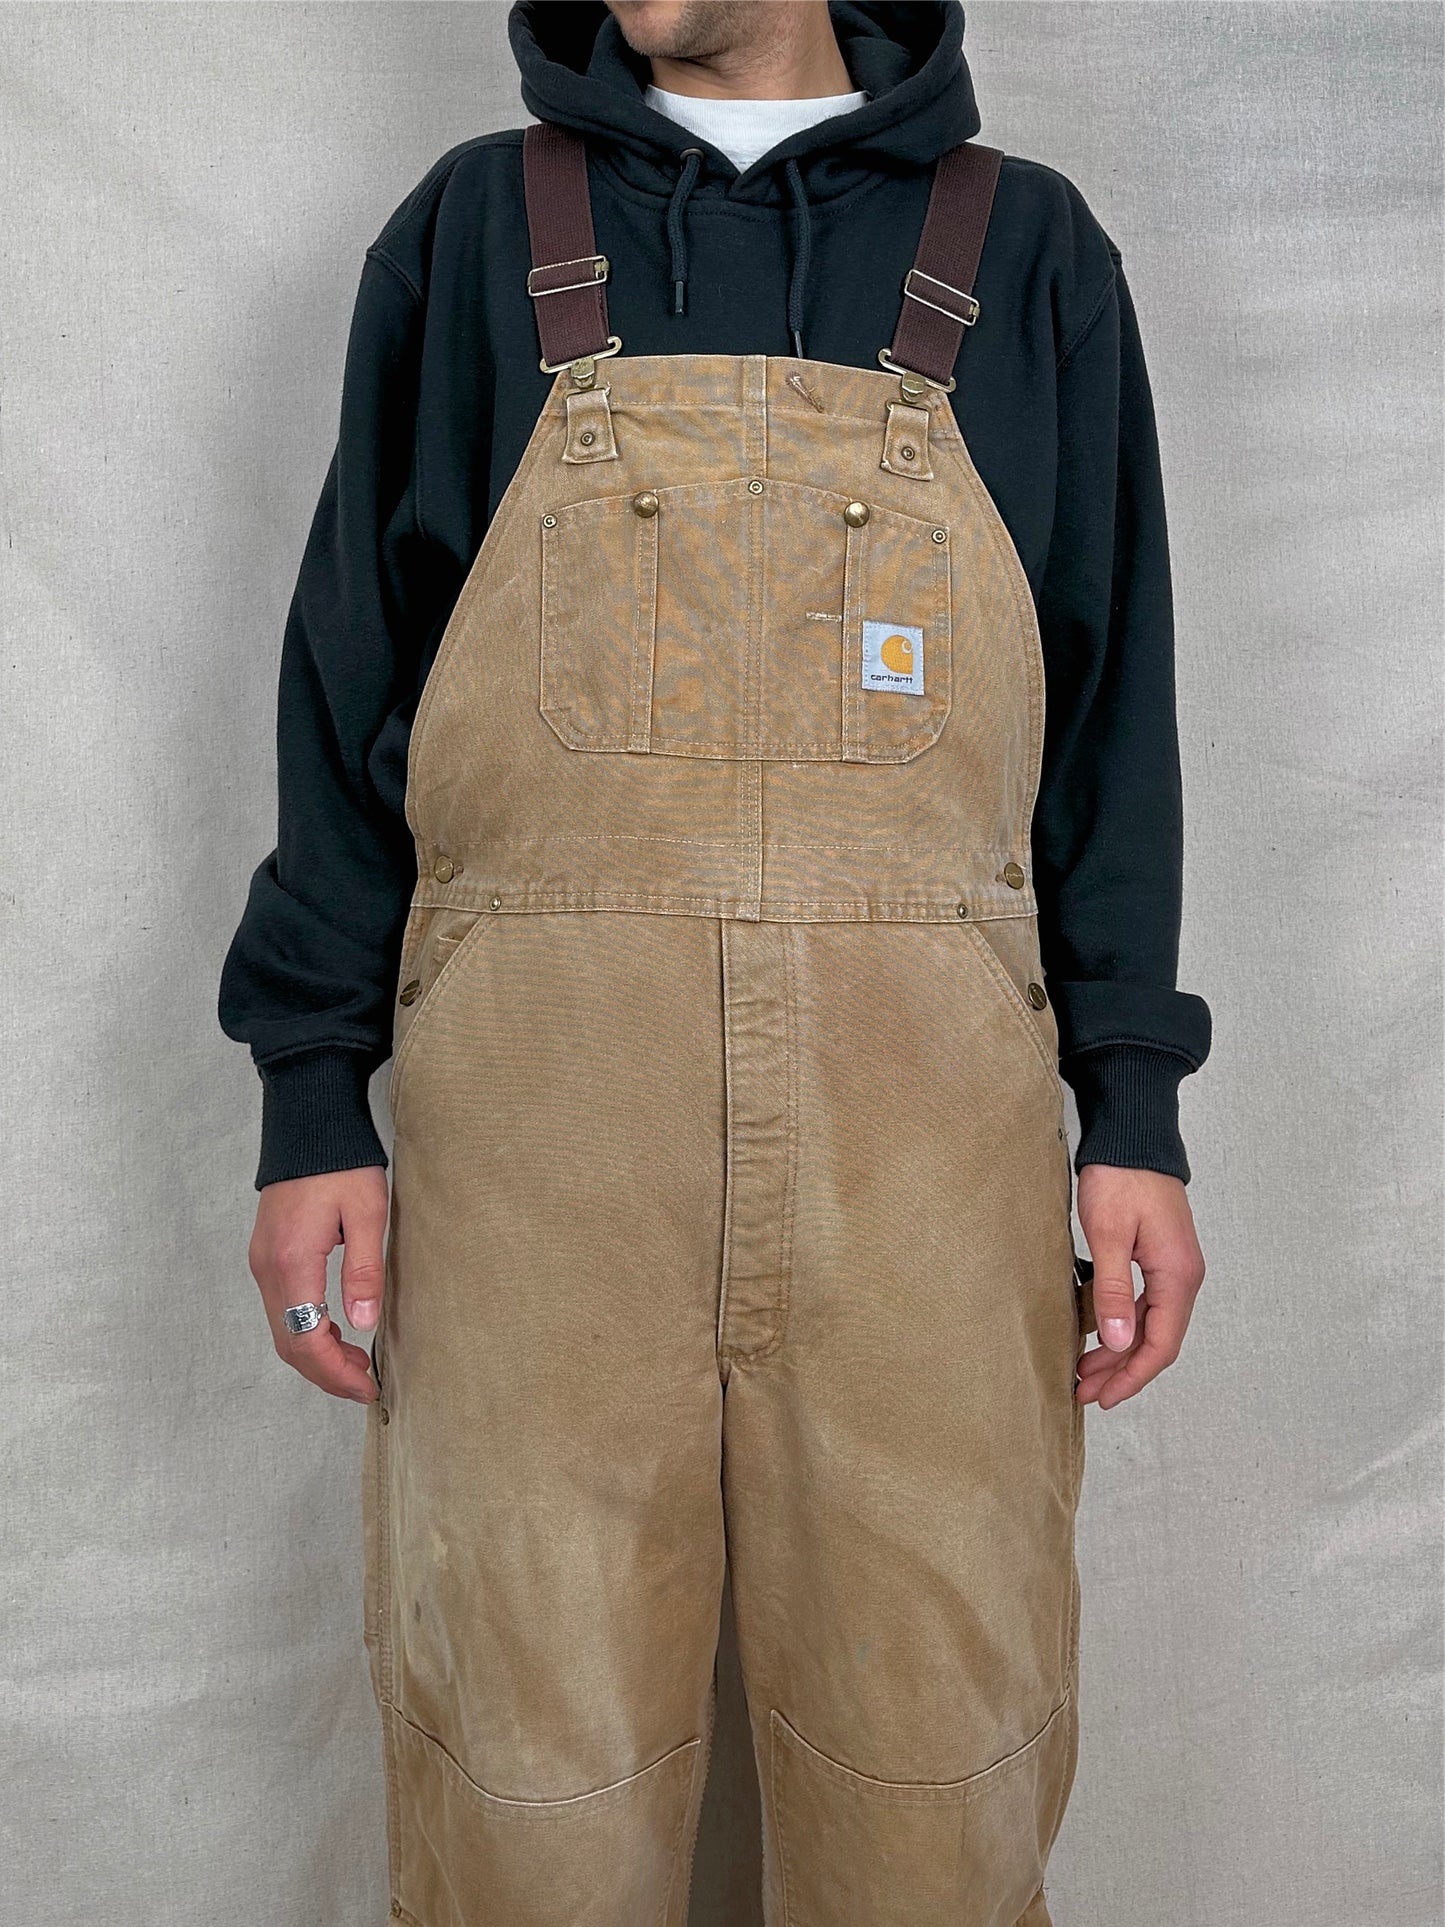 90's Carhartt Heavy Duty Vintage Dungarees/Overalls up to Size 38"